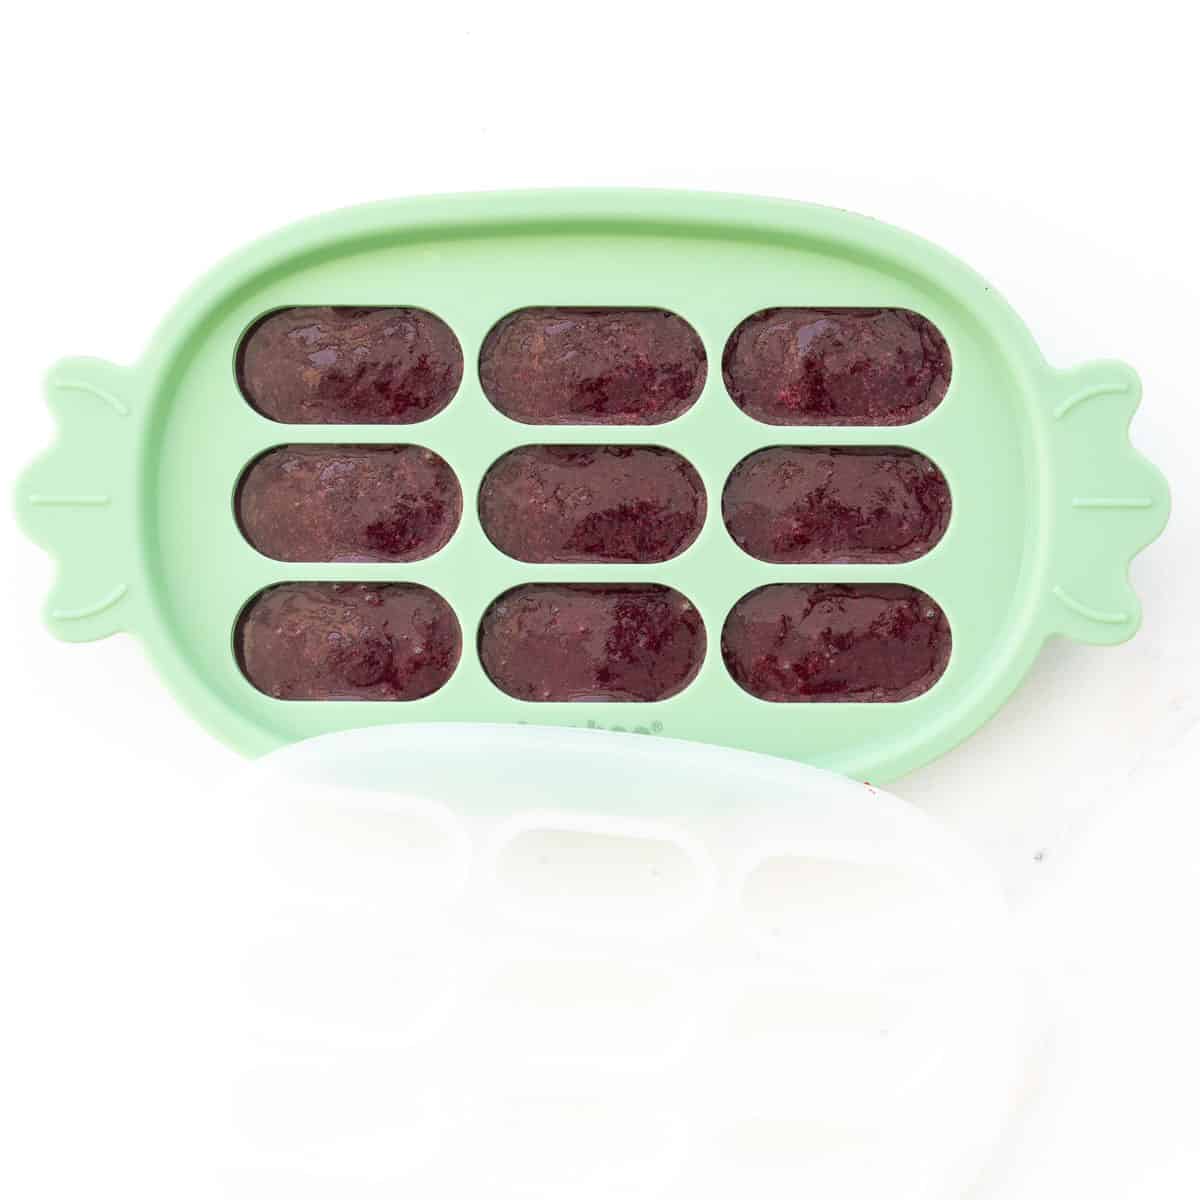 Purple baby food in a green silicone ice cube tray. 